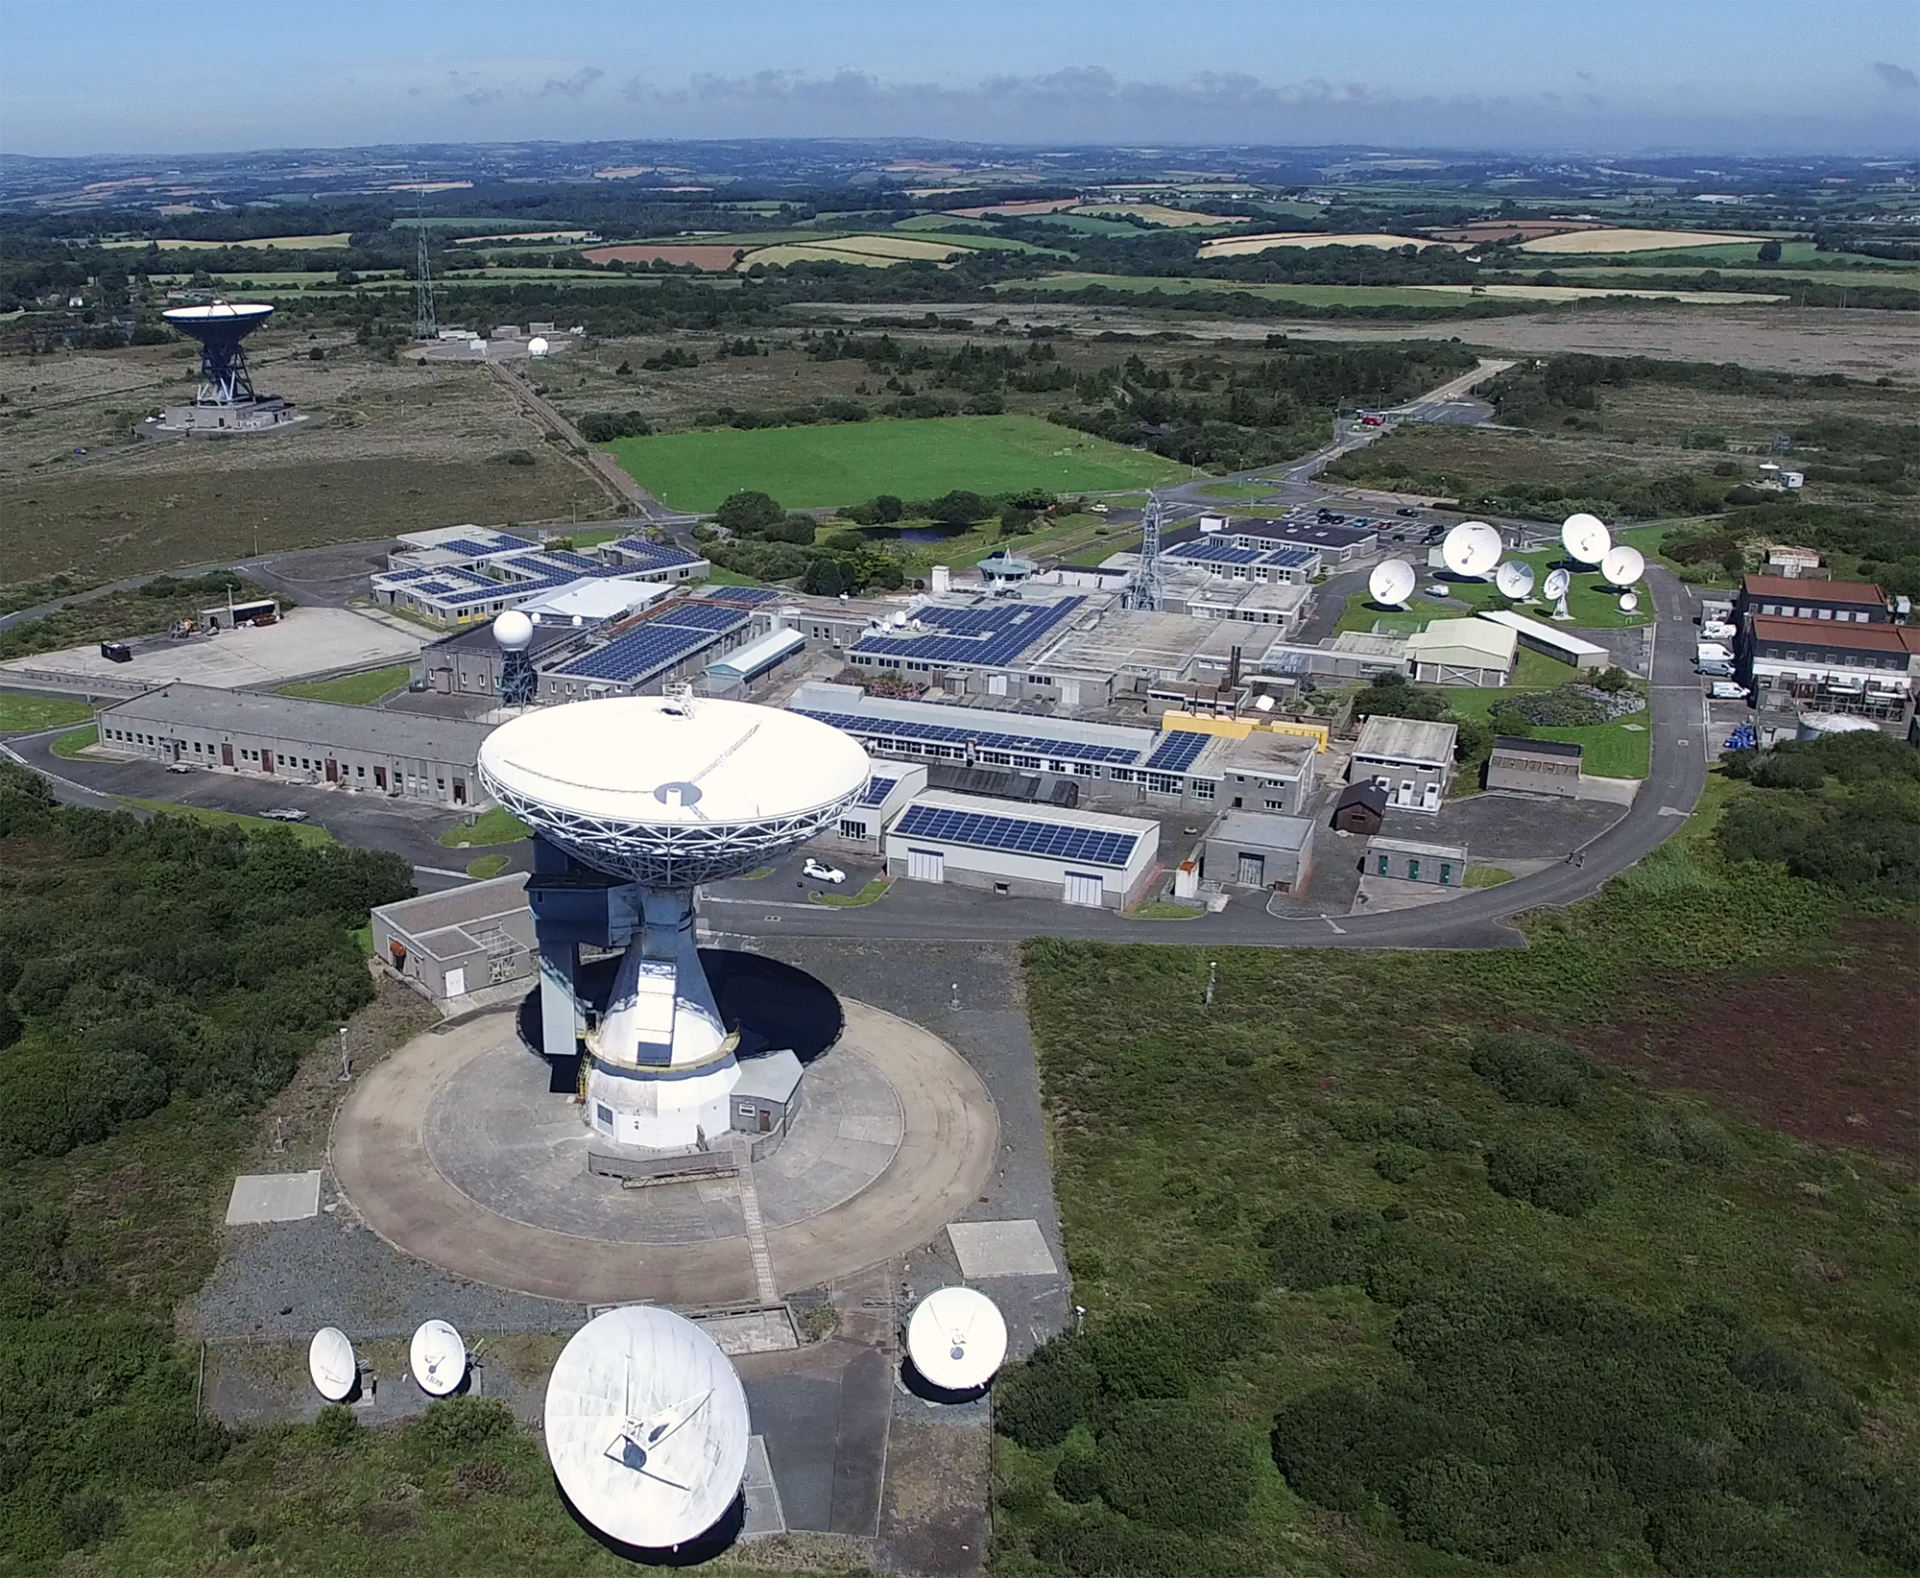 Aerial view of Goonhilly